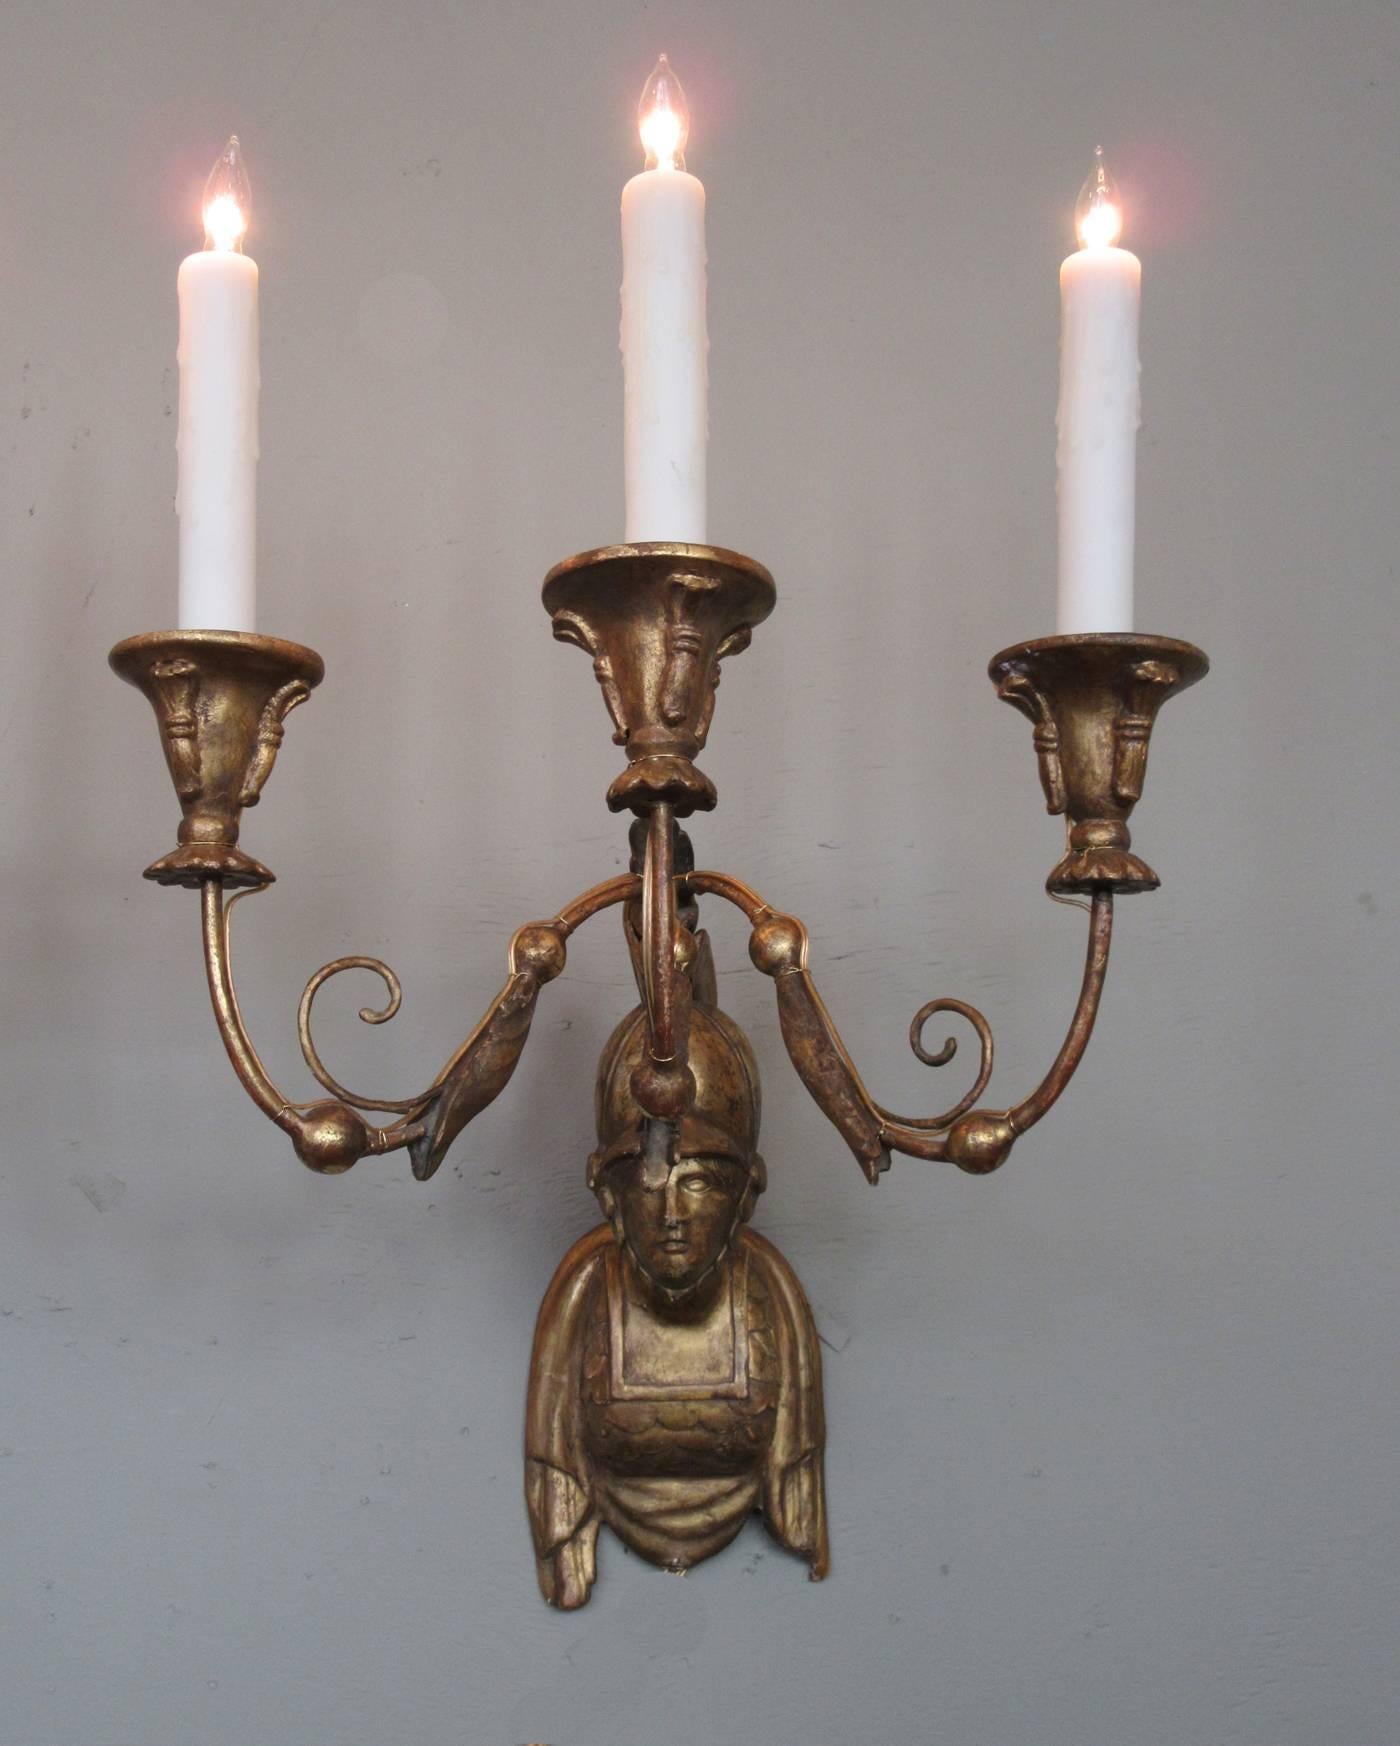 Early 19th Century Italian Neoclassical Giltwood Sconces with Roman Soldier Bust For Sale 2